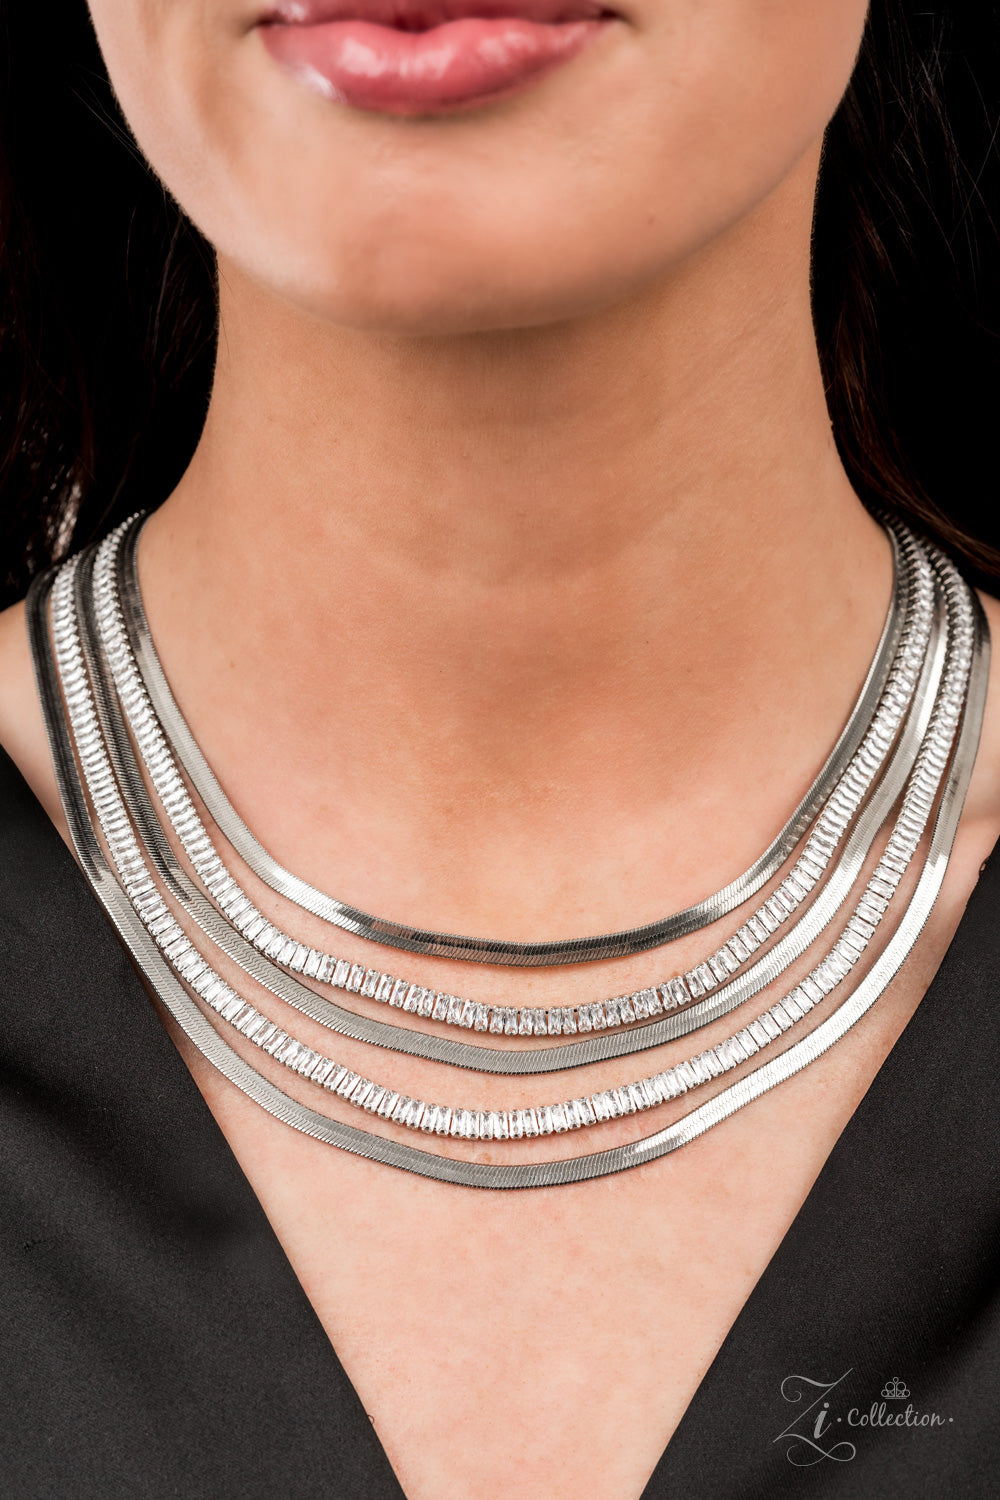 Persuasive 2021 Zi Collection Necklace - Paparazzi Accessories  Alternating rows of flat silver snake chain and glassy strands of edgy emerald cut rhinestones sleekly layer below the collar. The deceptively simple metallic silver and white rhinestone palette is unapologetically mesmerizing, making this smooth statement piece an instant classic. Features an adjustable clasp closure.  Sold as one individual necklace. Includes one pair of matching earrings.